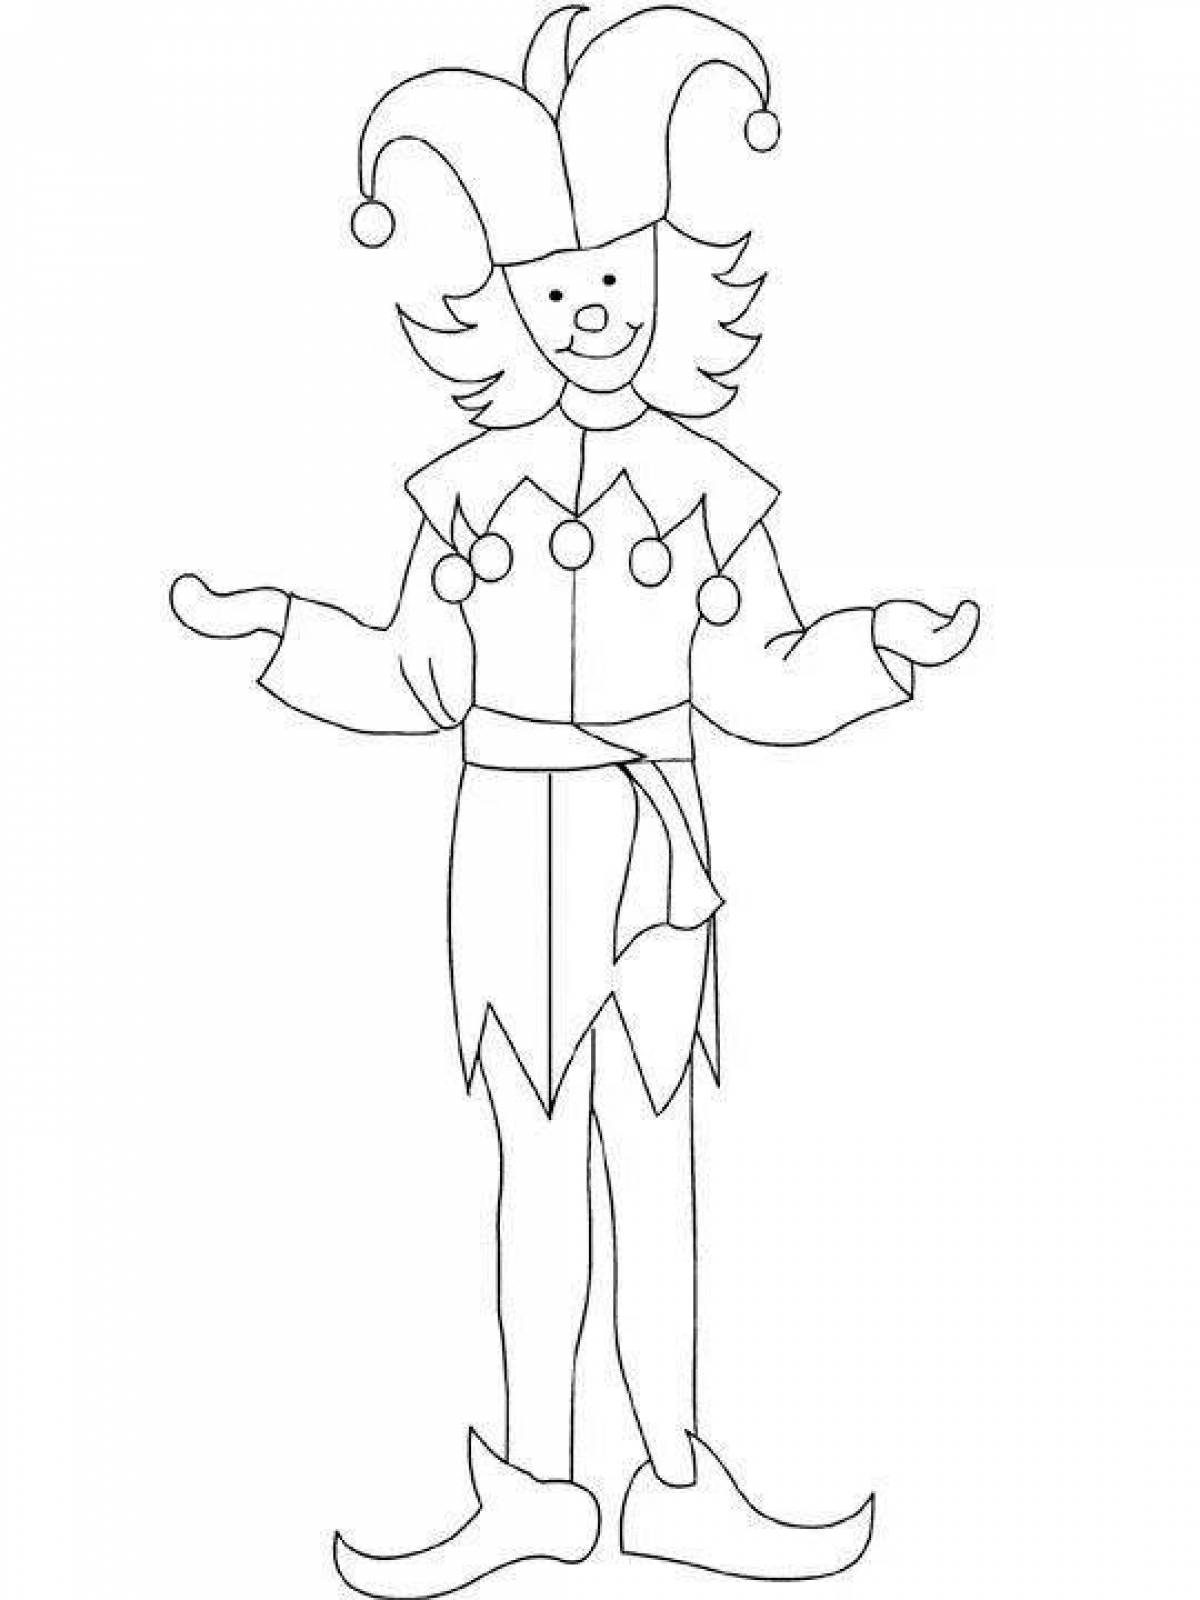 Coloring page magnificent theatrical costume